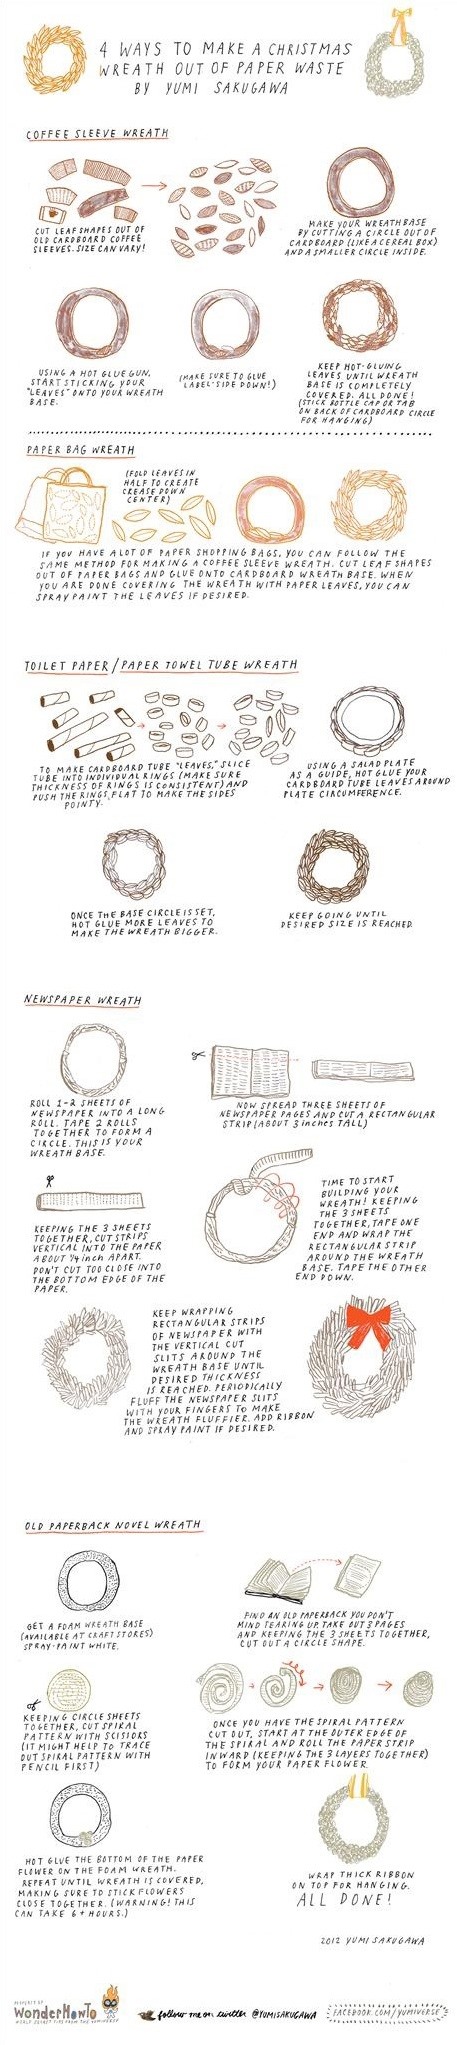 4 Ways to Make a Christmas Wreath Out of Paper Waste